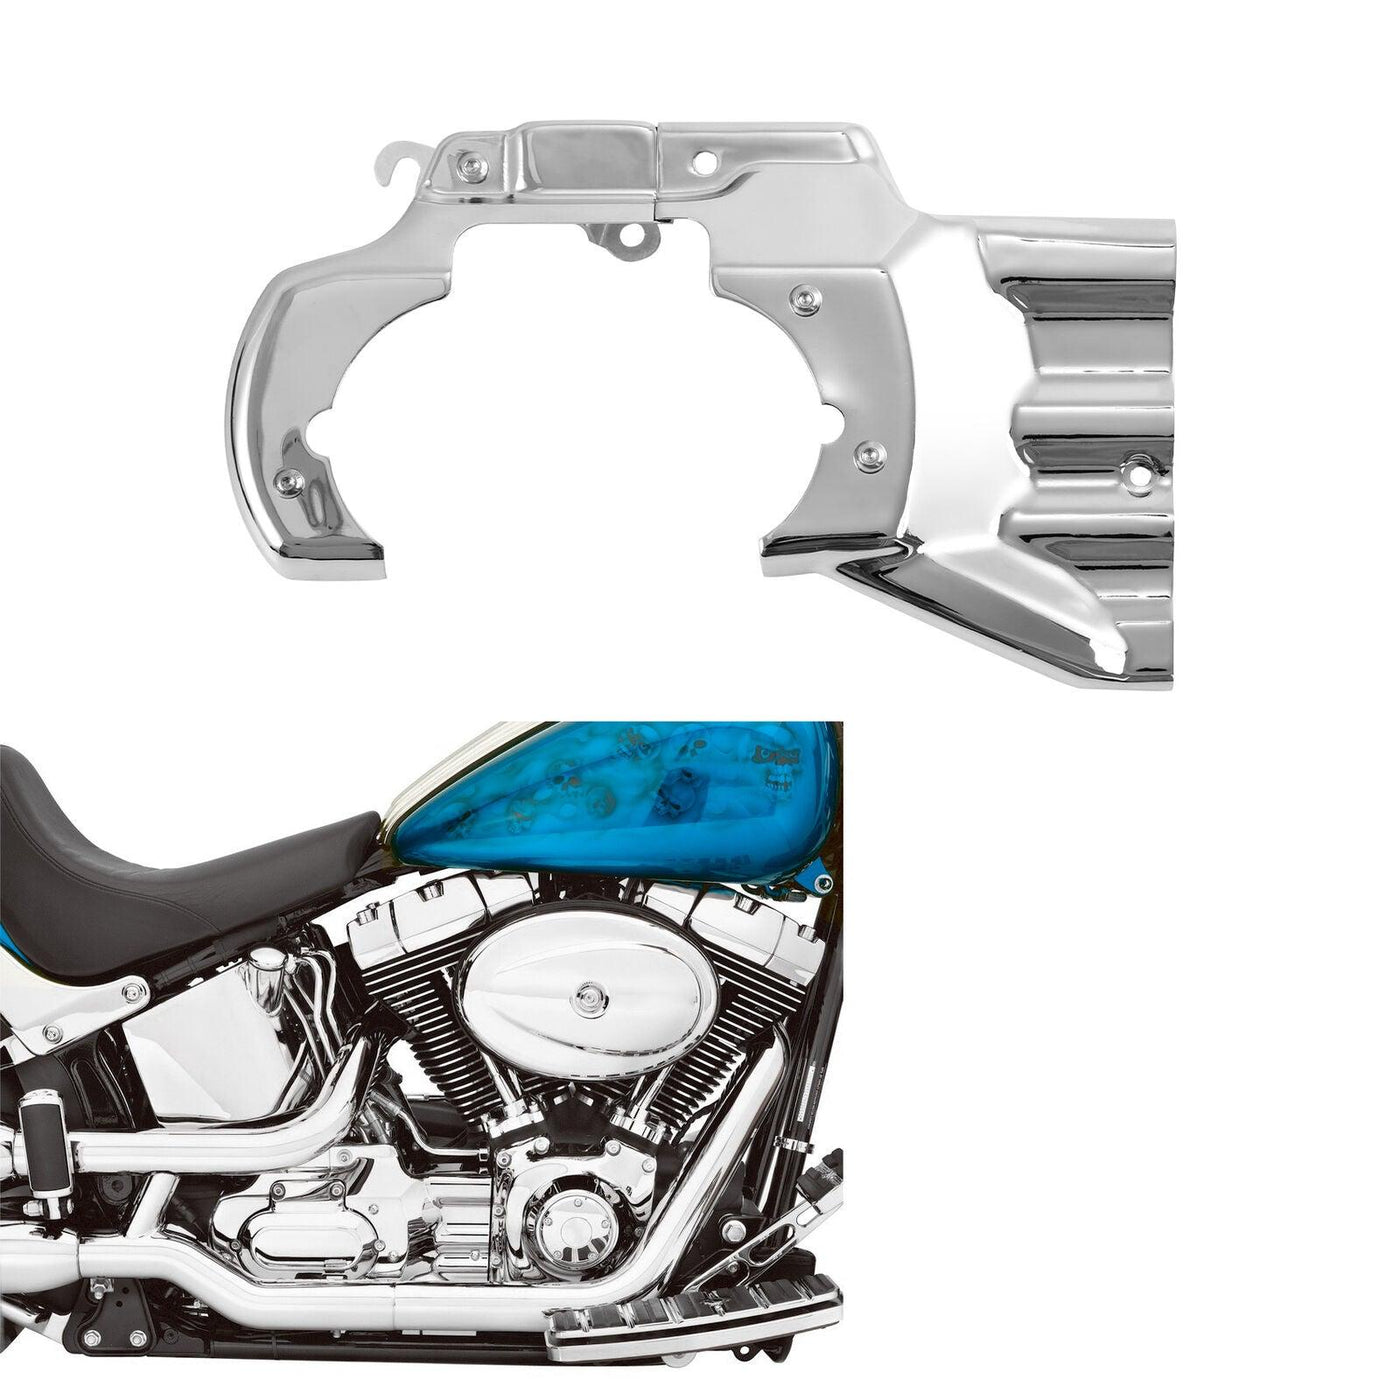 Chrome Engine Transmission Interface Cover Fit For Harley Softail 2007-2017 - Moto Life Products